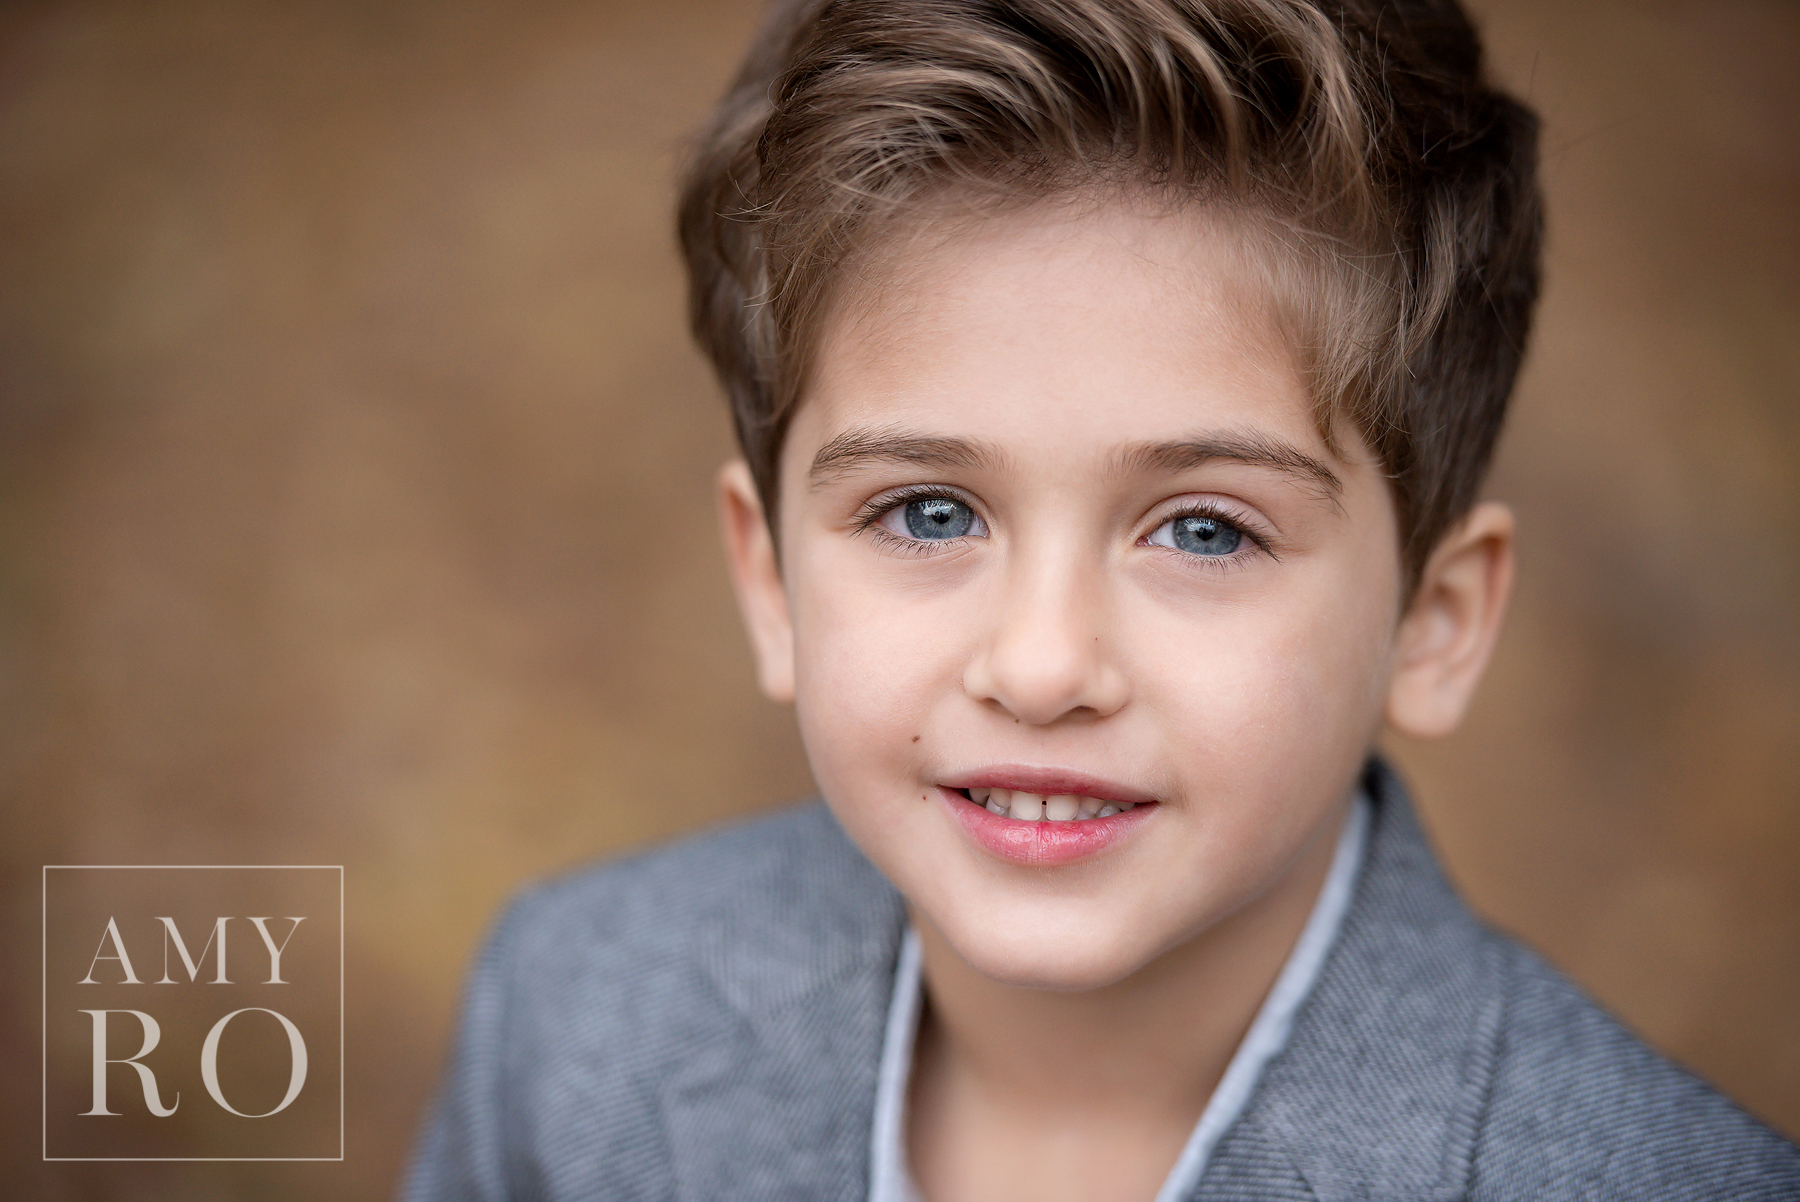 Gorgeous young boy image, bright blue eyes with brown hair